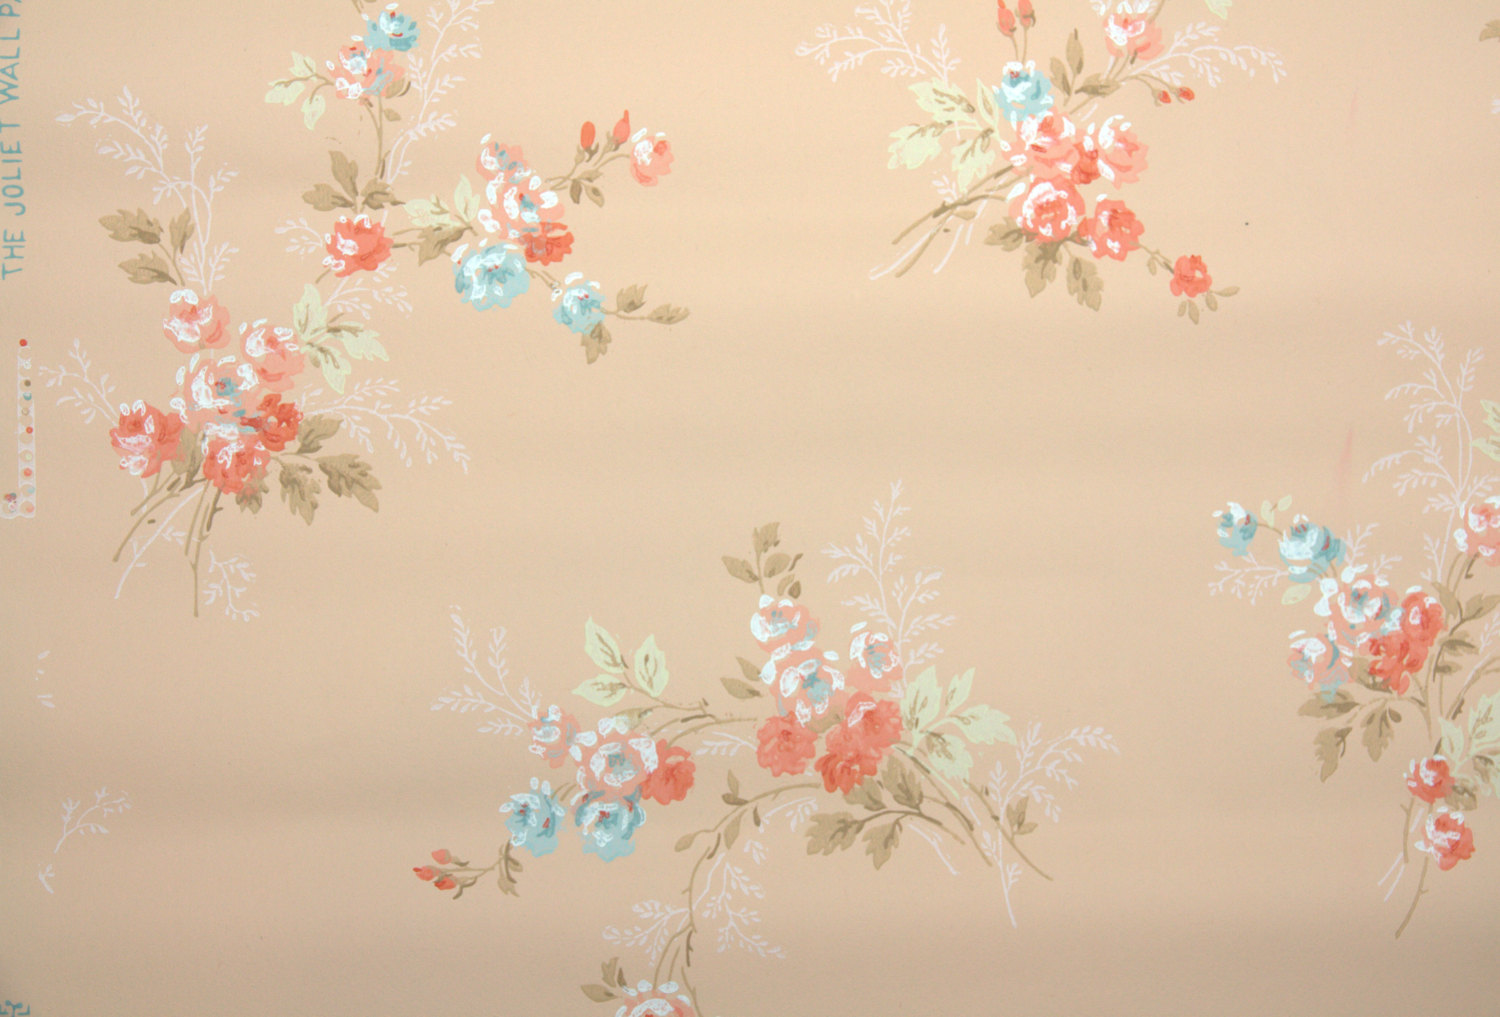 1930s Vintage Wallpaper Floral Wallpaper with by HannahsTreasures 1500x1017